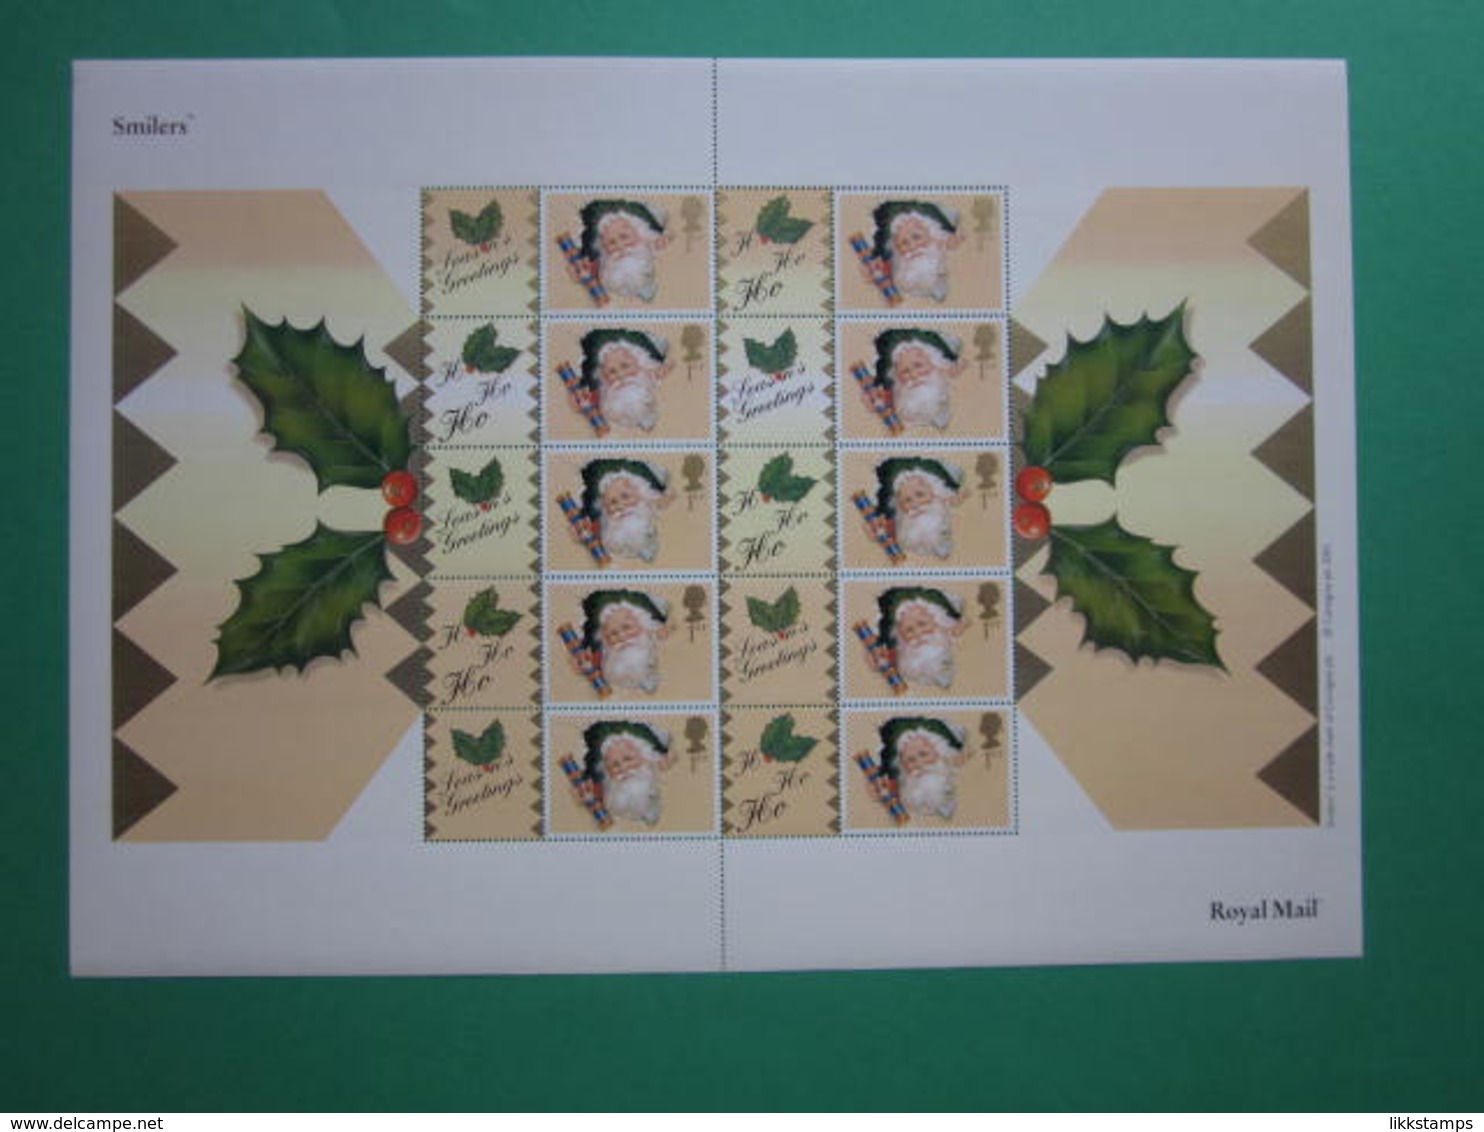 2001 ROYAL MAIL GENERIC SMILERS SANTA SHEET ISSUED FOR CHRISTMAS 2001. #SS0007 - Smilers Sheets